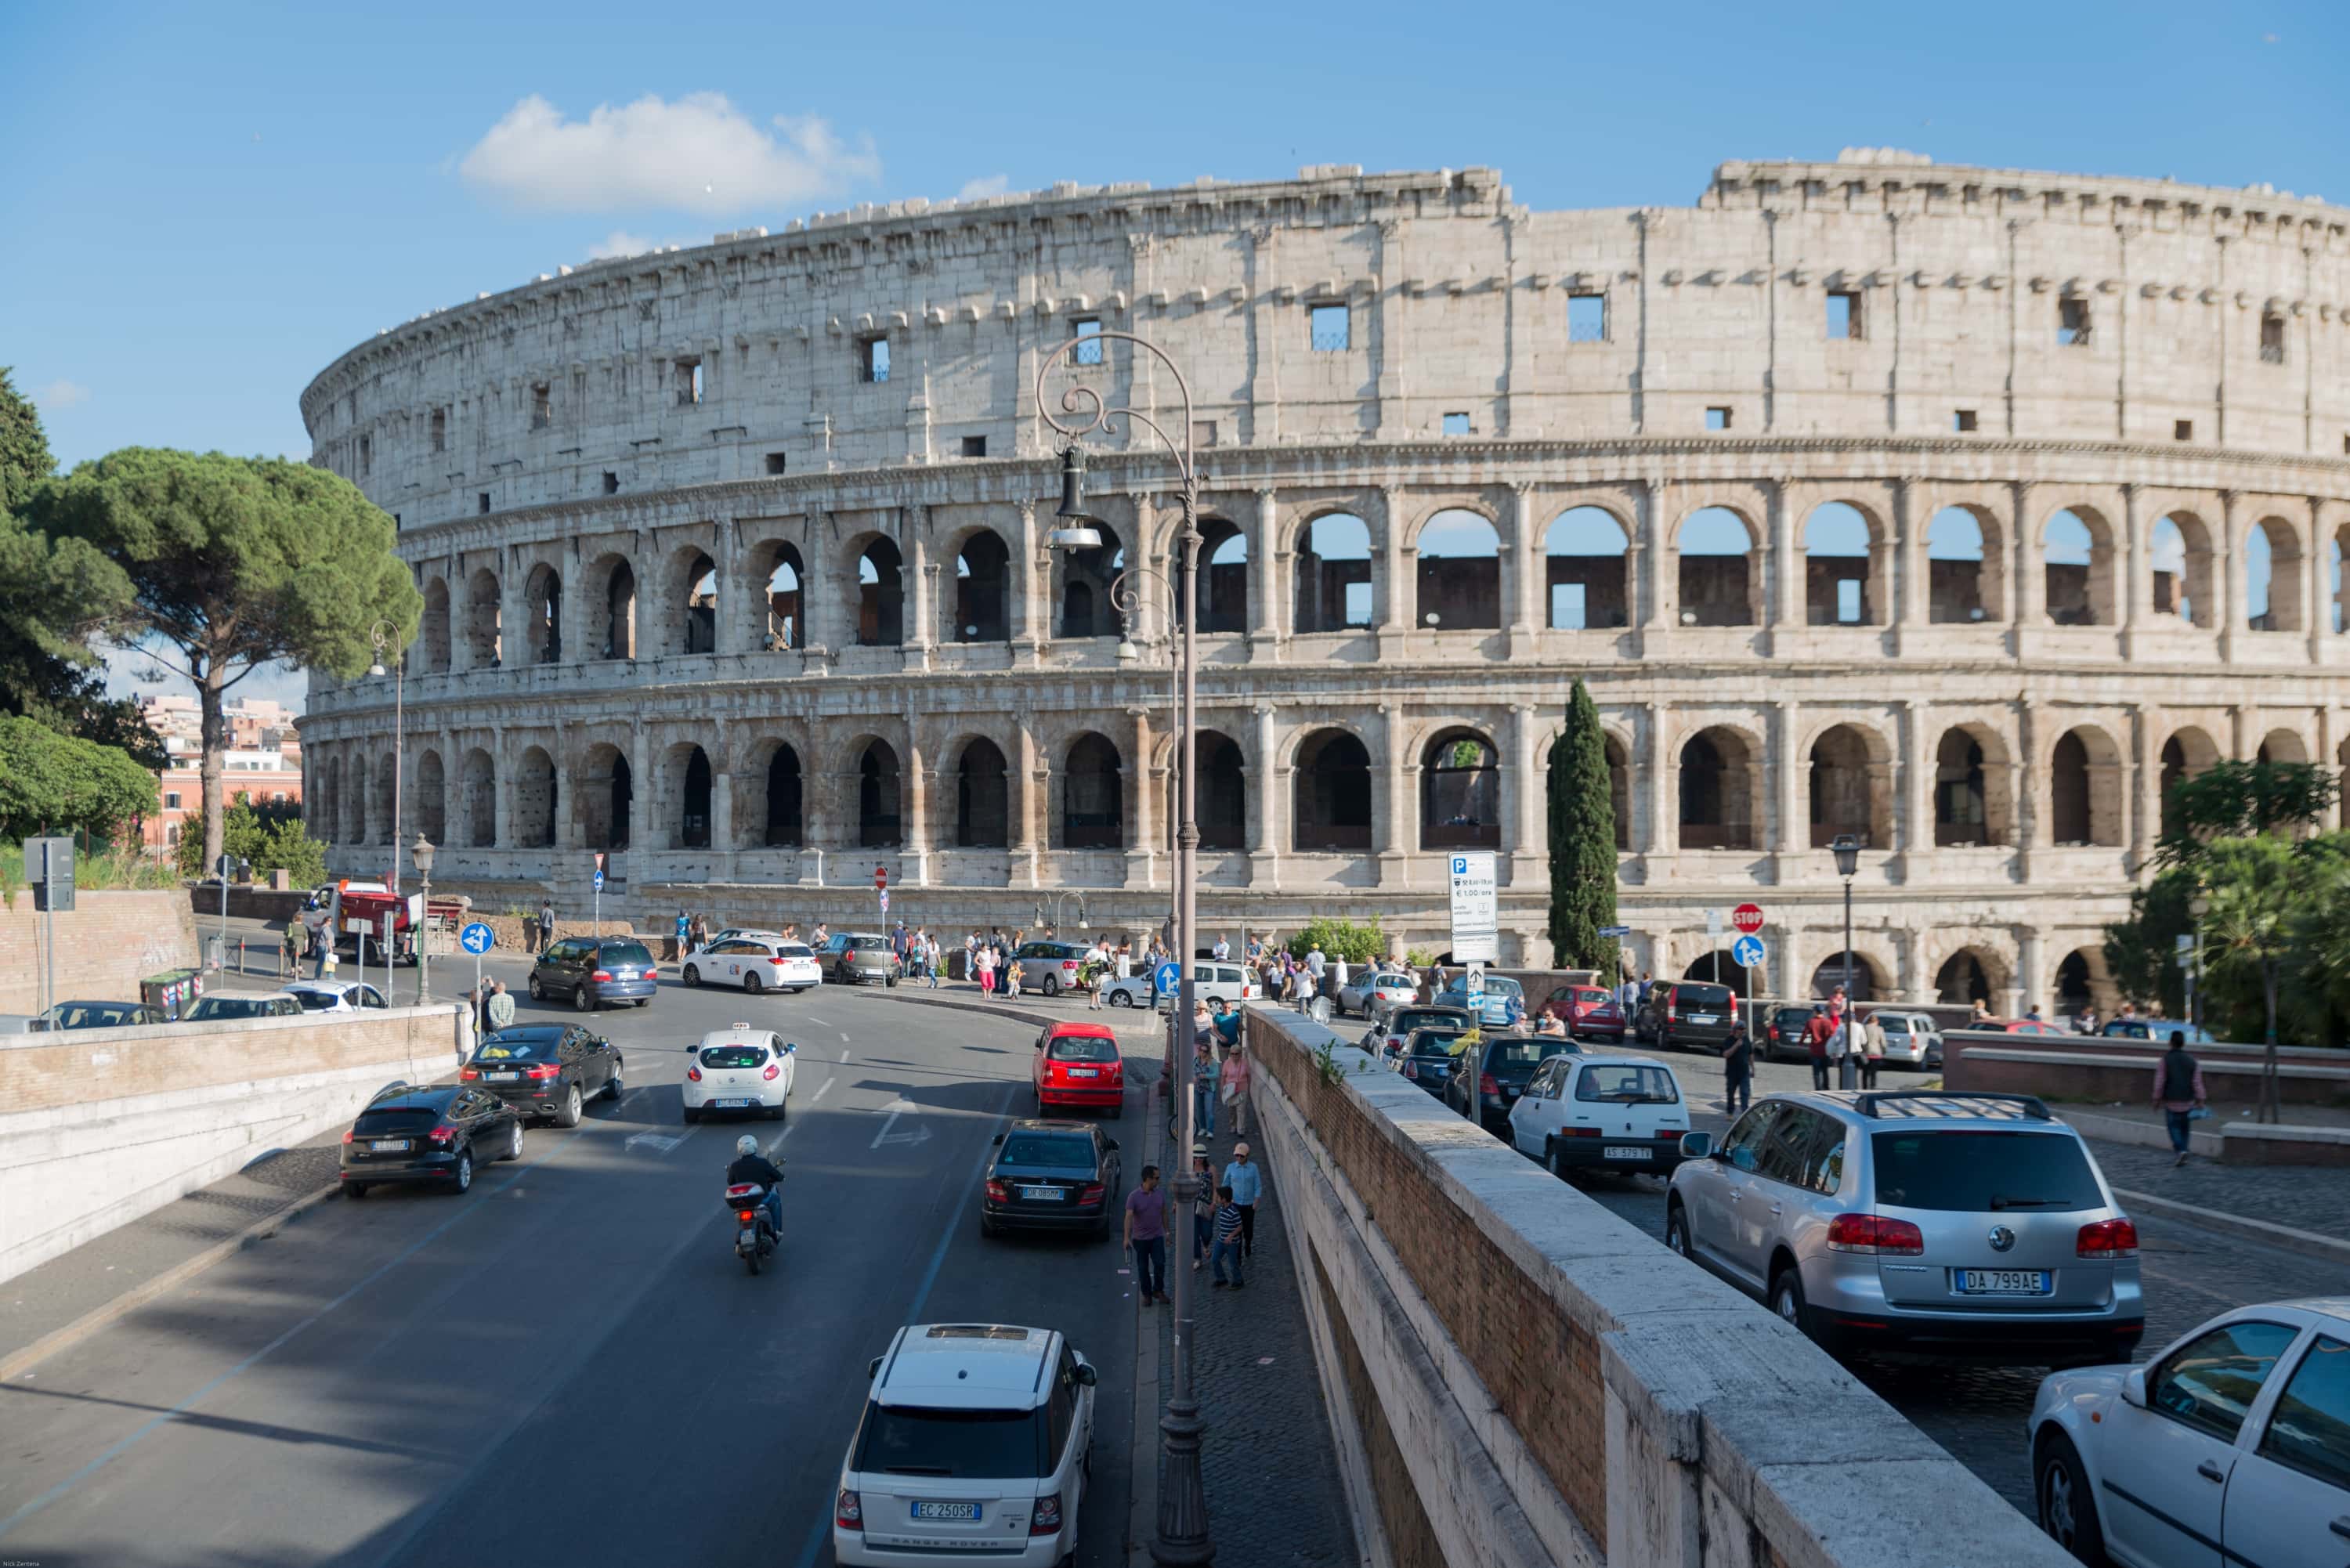 Update on free admission to the Colosseum in Rome Italy